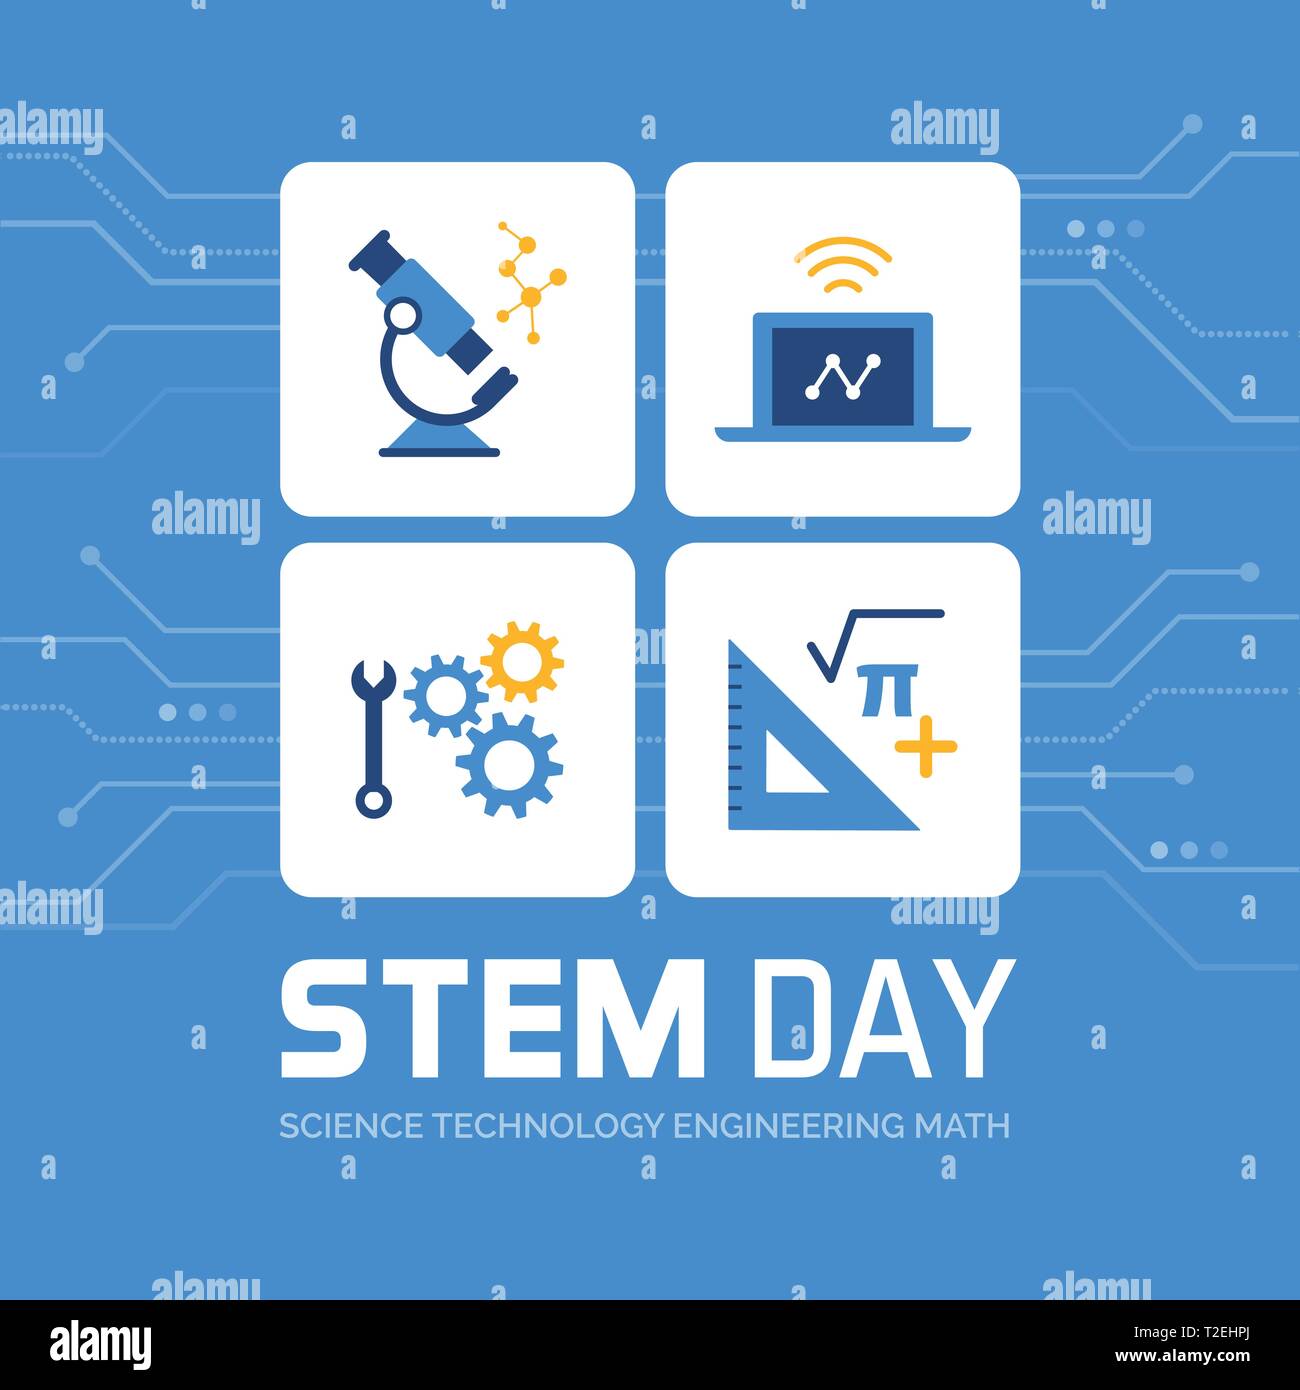 STEM day promotional design and social media post: science, technology, engineering and math Stock Vector